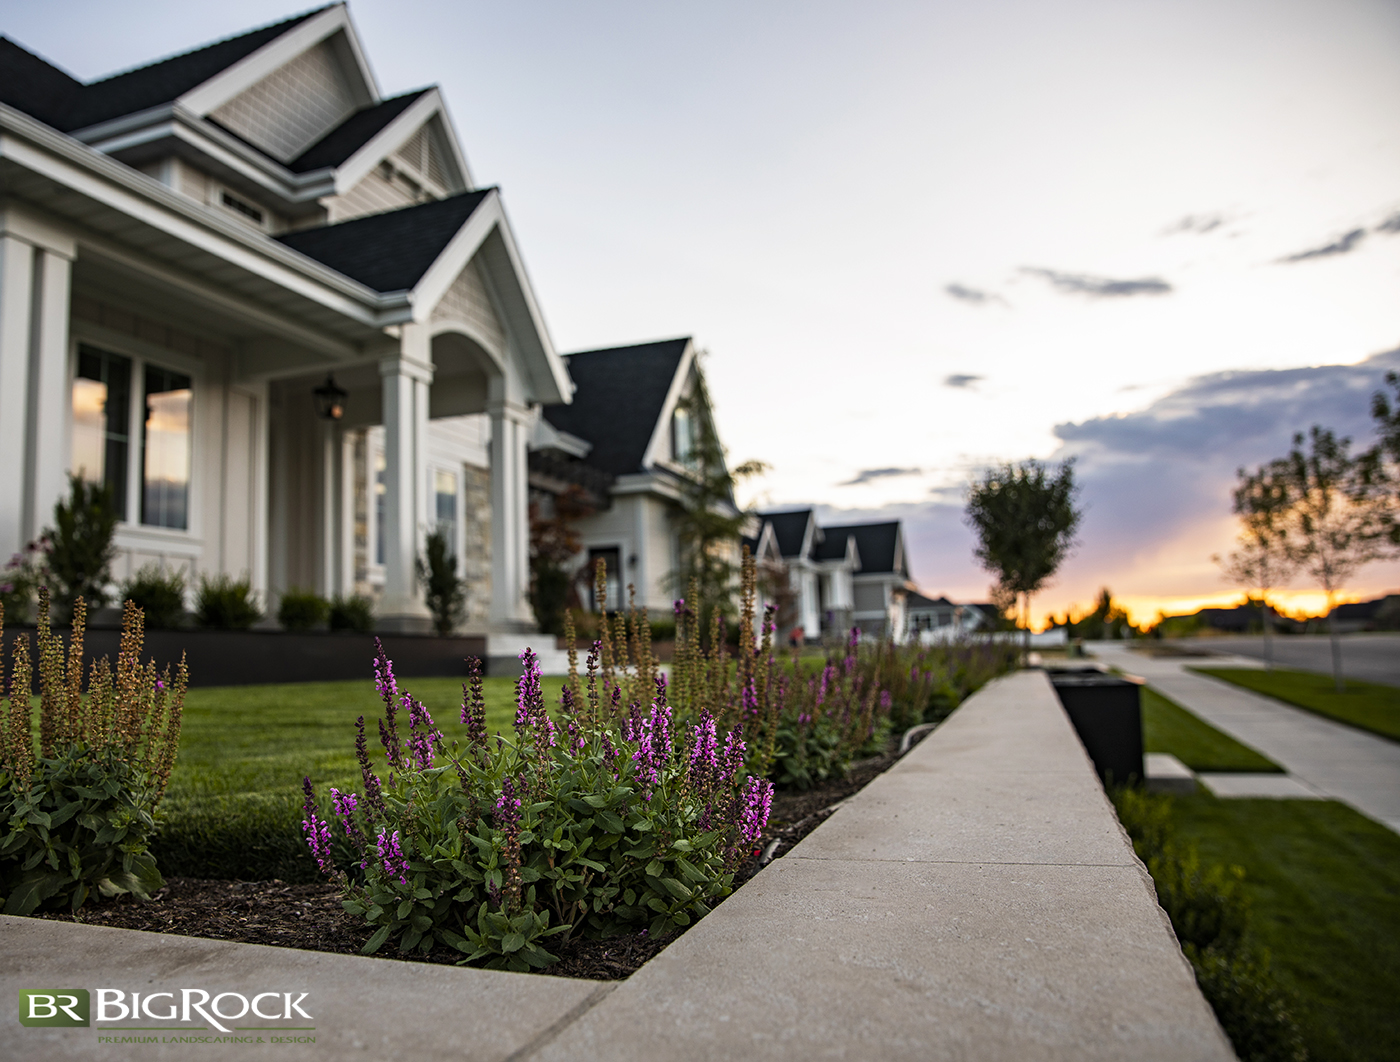 If you think modern landscape design is as simple as picking a couple of ornamental grasses and calling it a day, you haven’t seen some of the absolutely breathtaking modern landscapes our team at Big Rock Landscaping has designed.